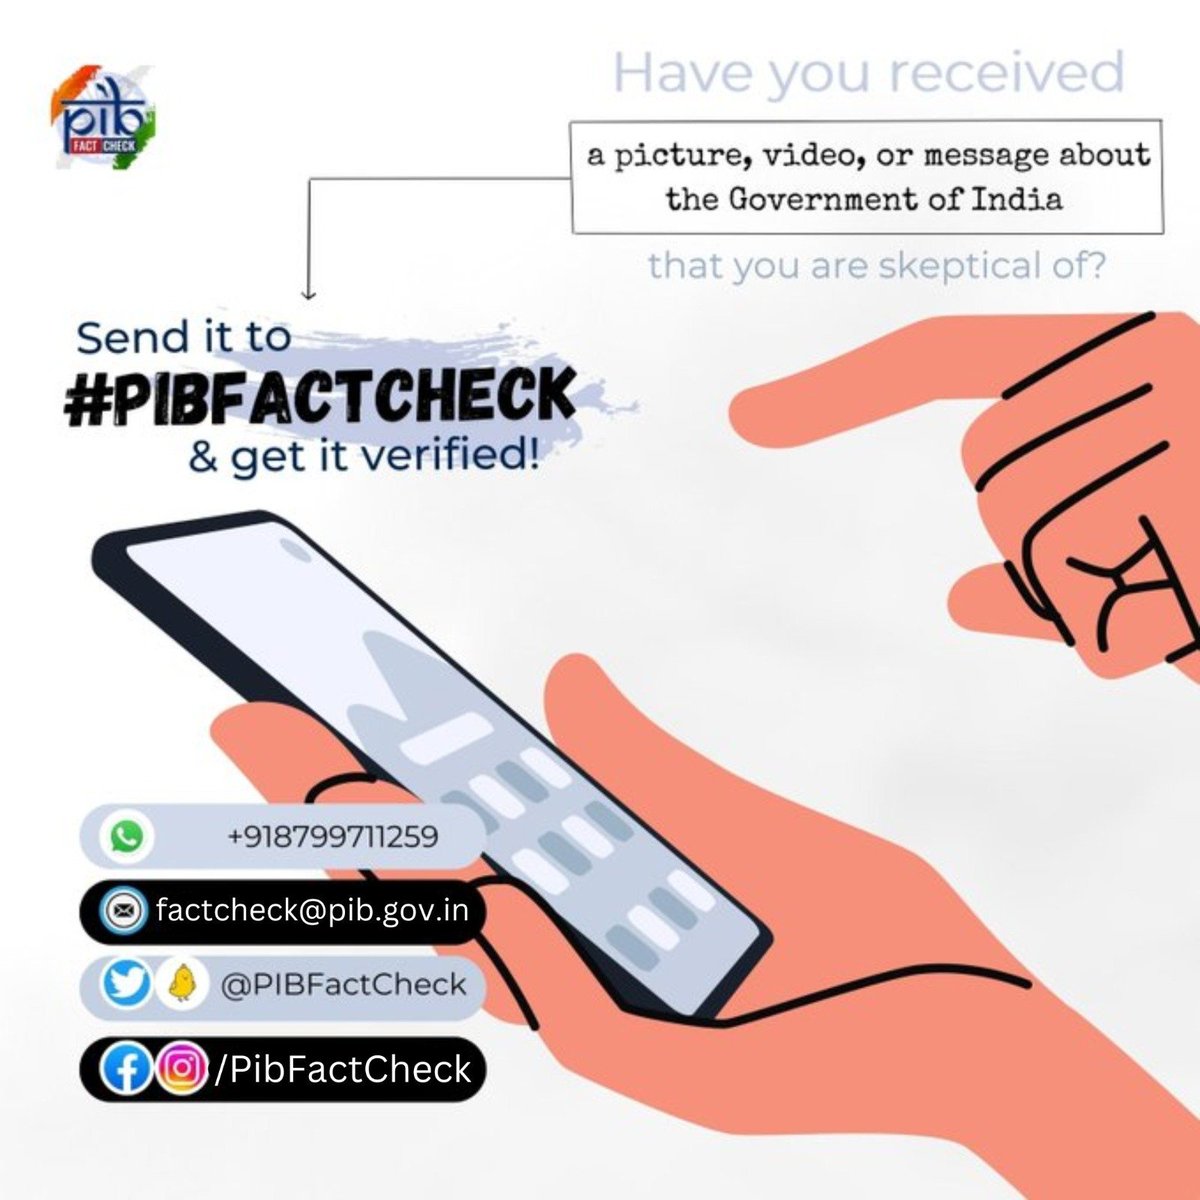 Your single forward can mislead many! If you are skeptical about any information, picture, video, or message related to the Government of India, send it to #PIBFactCheck & get it verified! 📲+91 8799711259 📩factcheck@pib.gov.in